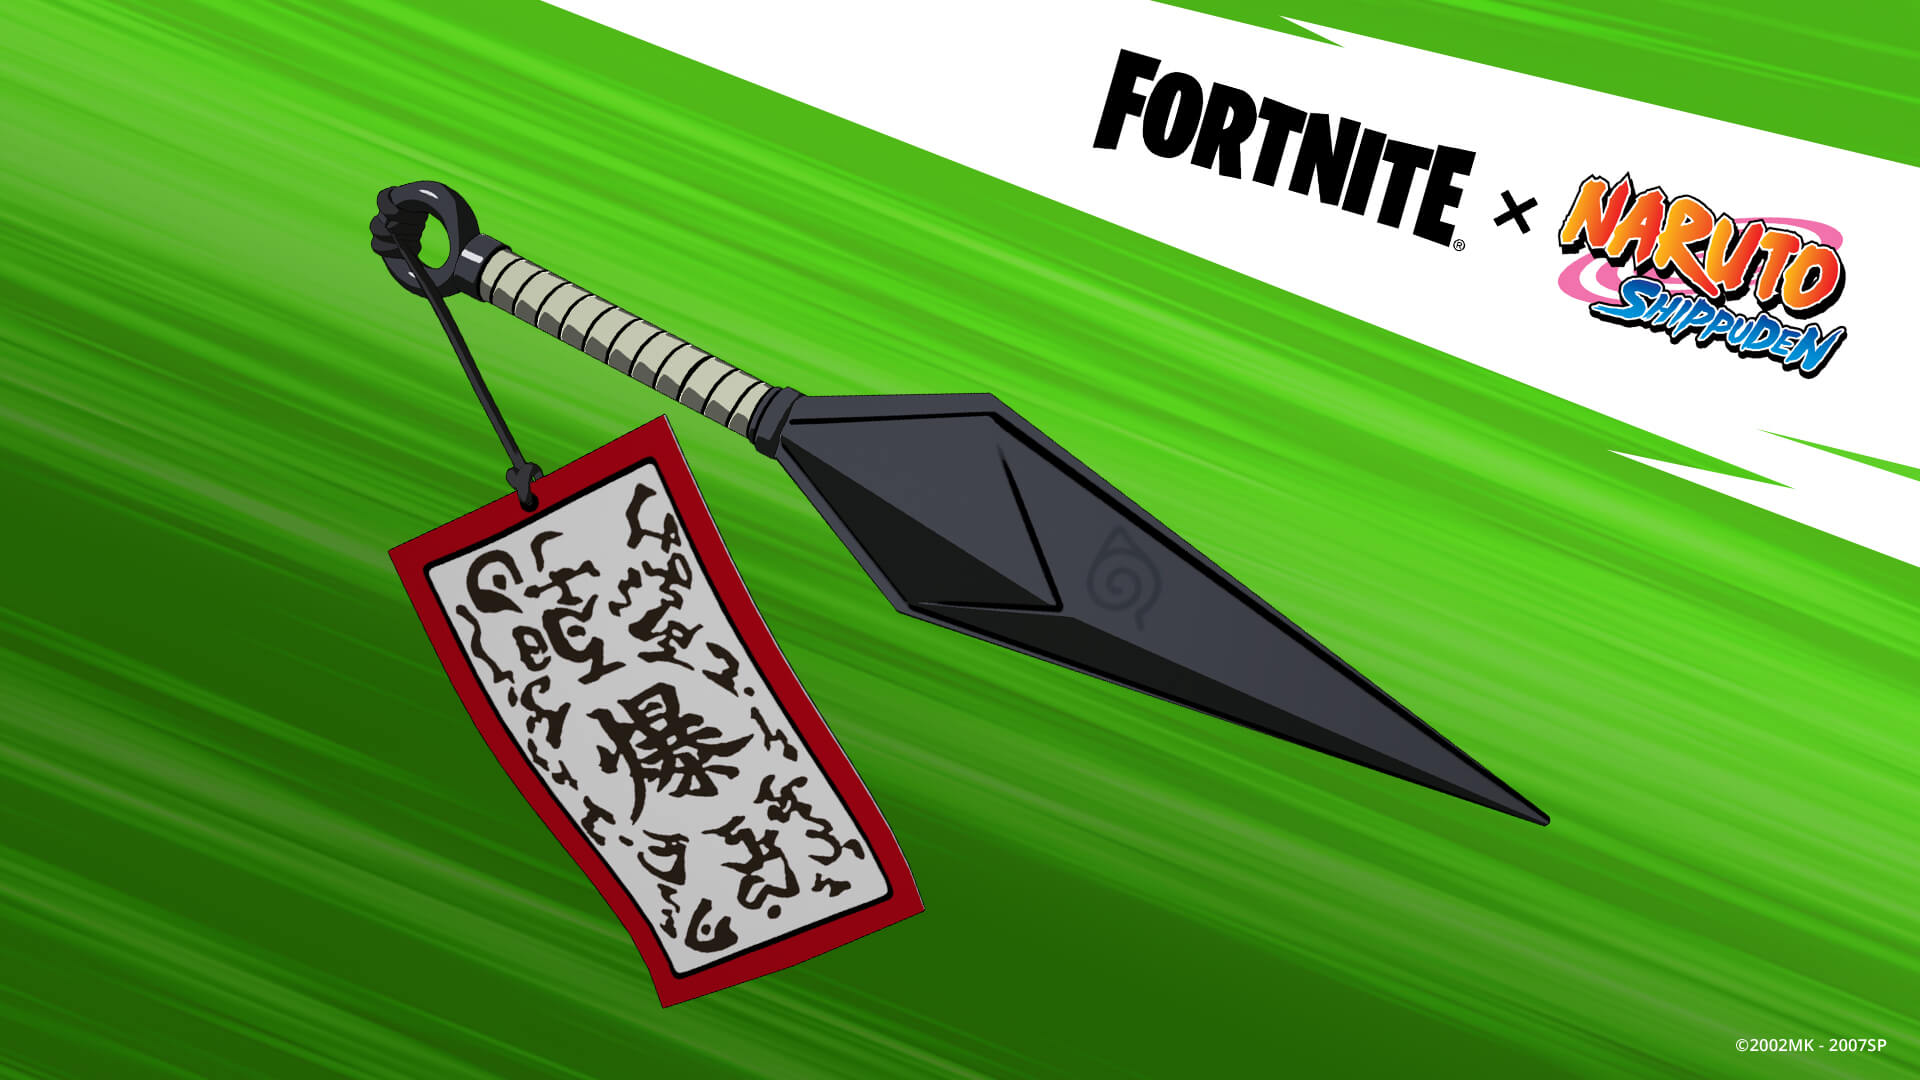 Patch Notes for Fortnite v18.40 - Naruto, Shopping Carts, Salvaged B.R.U.T.E. & more